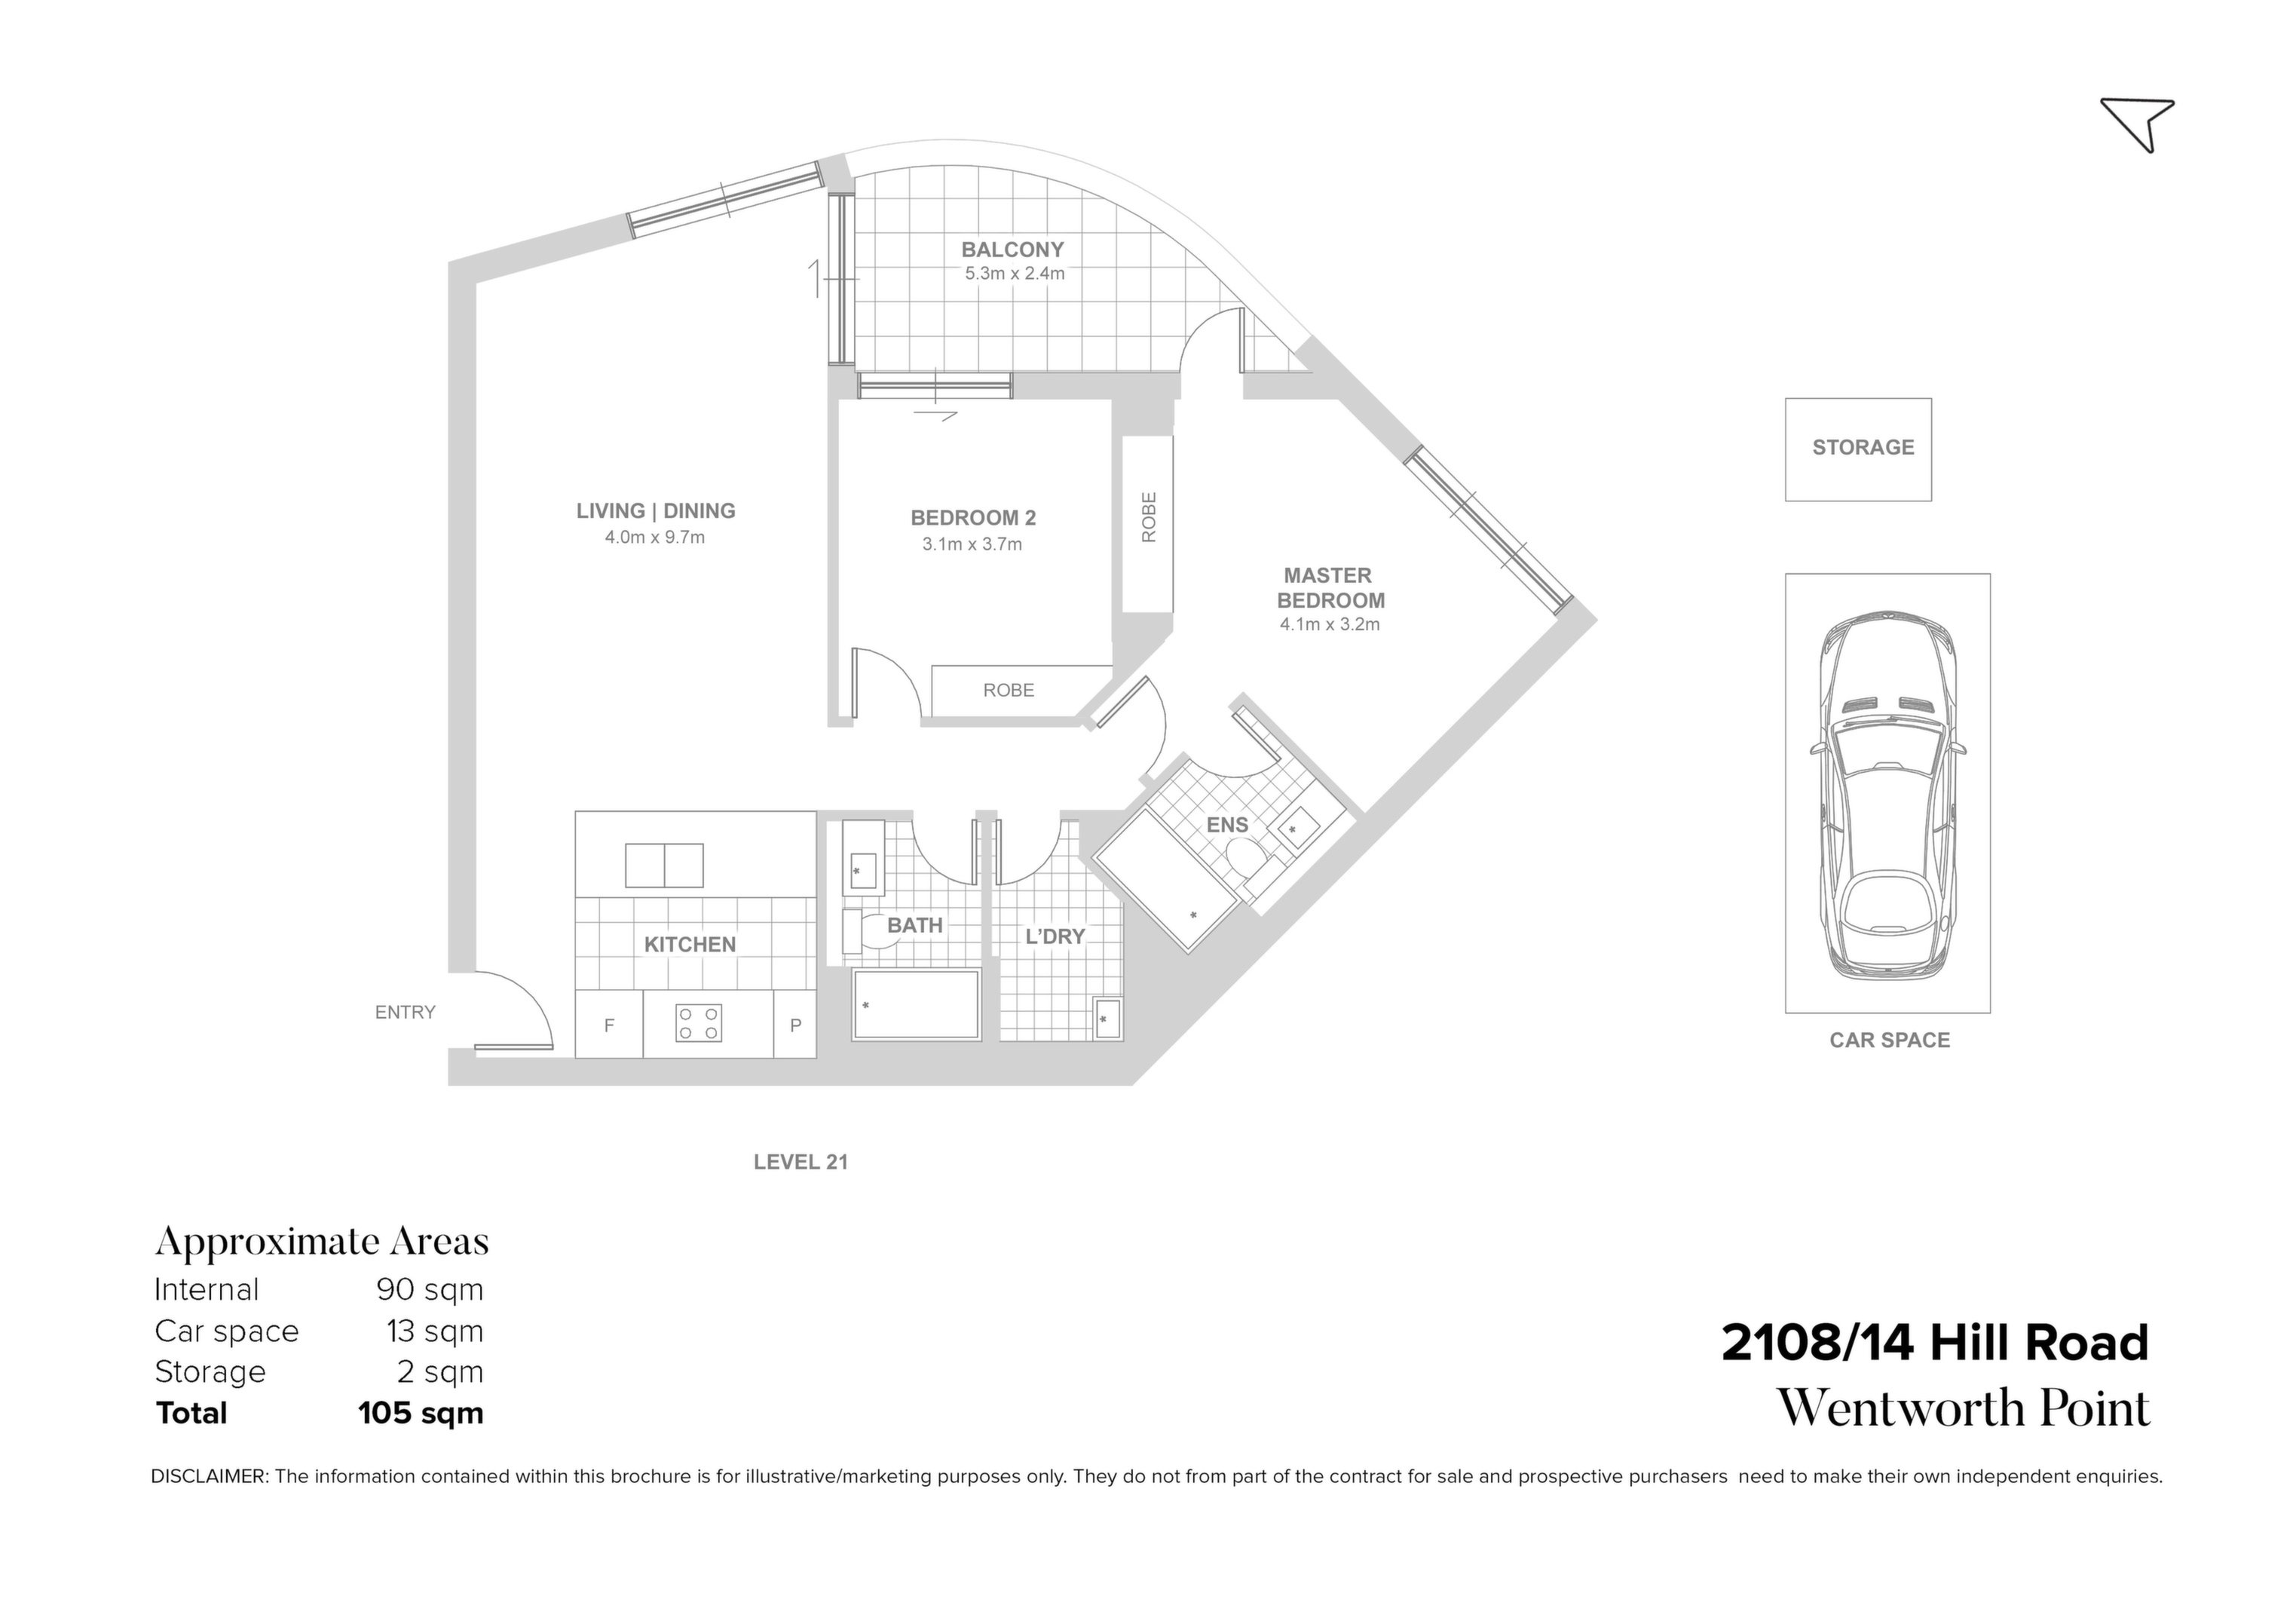 2108/14 Hill Road, Wentworth Point Sold by Chidiac Realty - floorplan